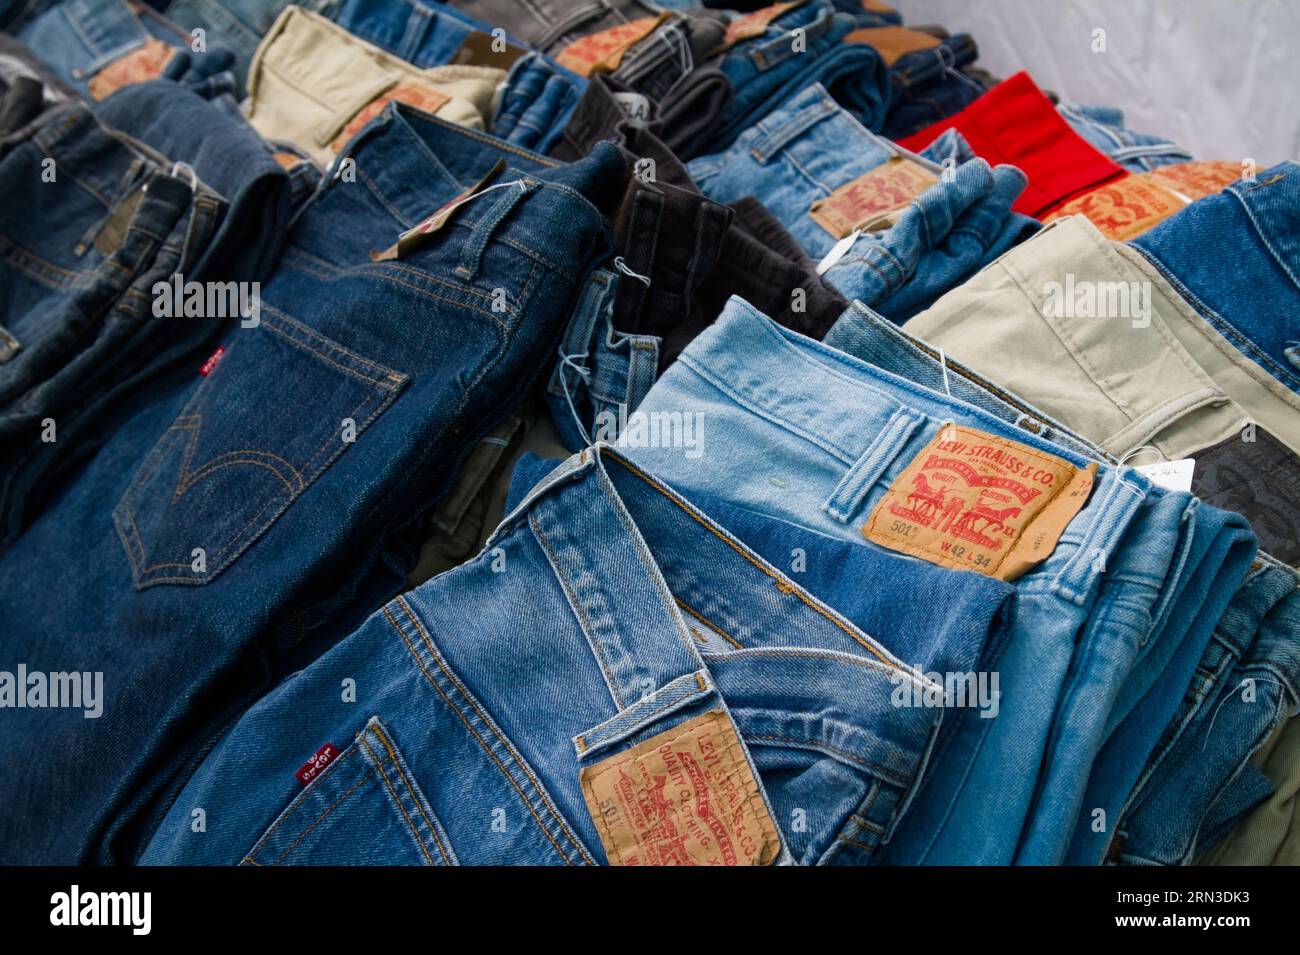 Folded Vintage Levis Strauss Denim Jeans For Sale On A Vintage Clothing Market Stall, England, Uk Stock Photo